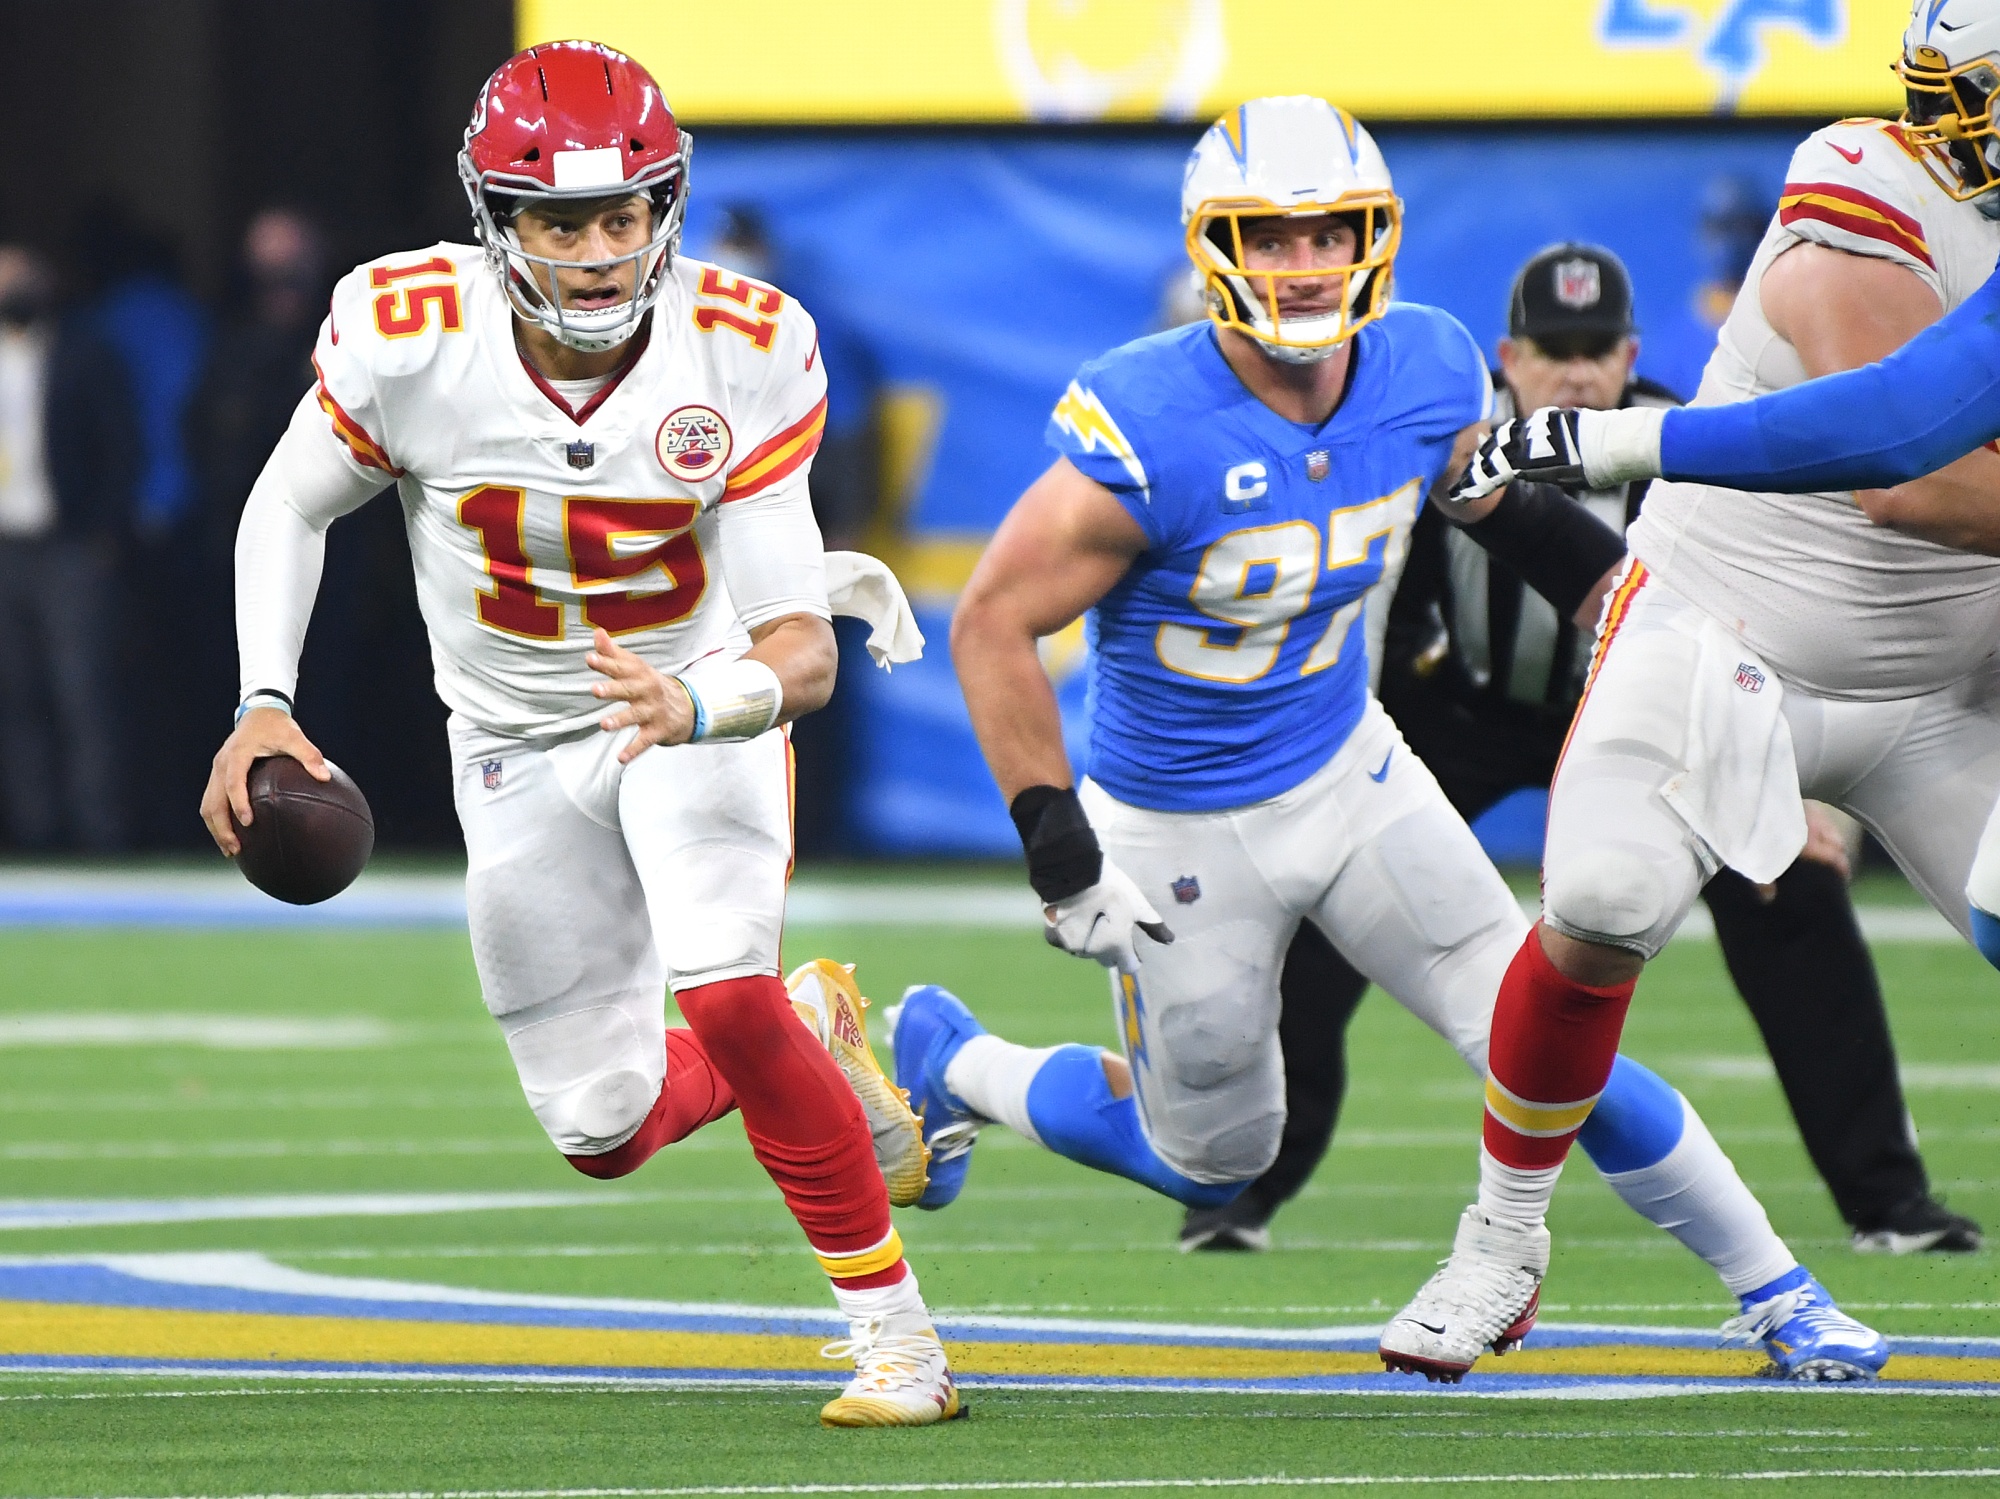 How to watch, listen, stream Chargers vs. Chiefs